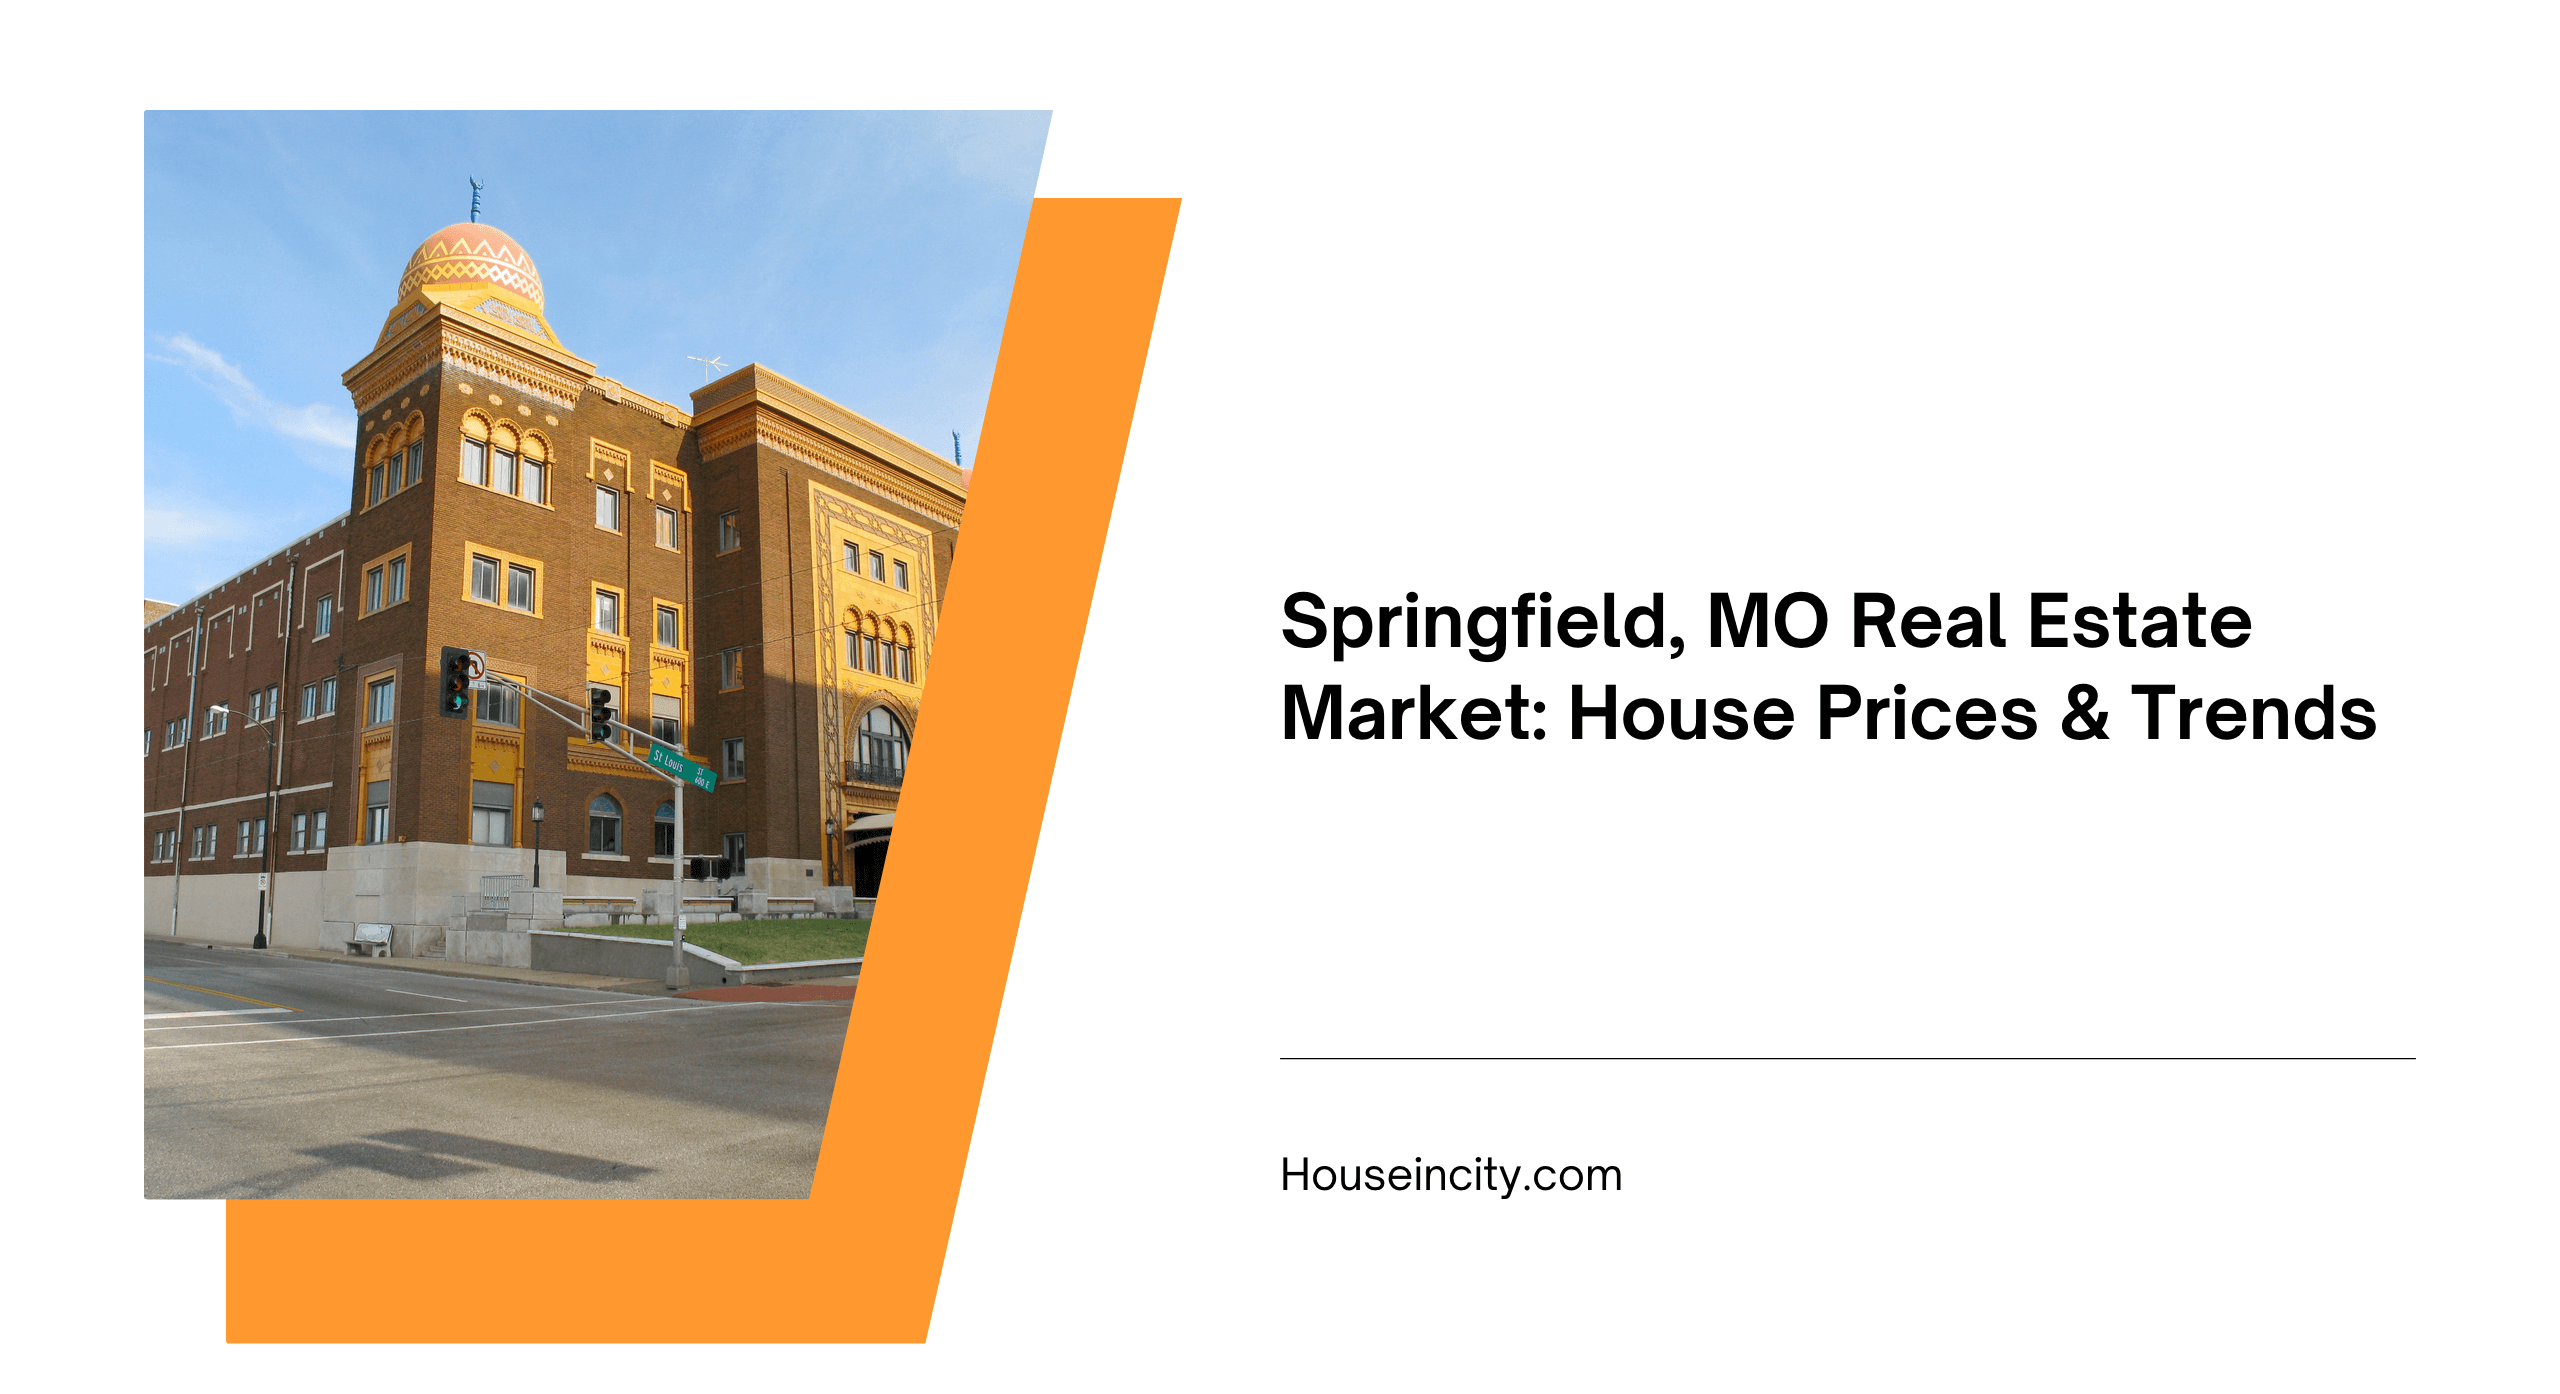 Springfield, MO Real Estate Market: House Prices & Trends